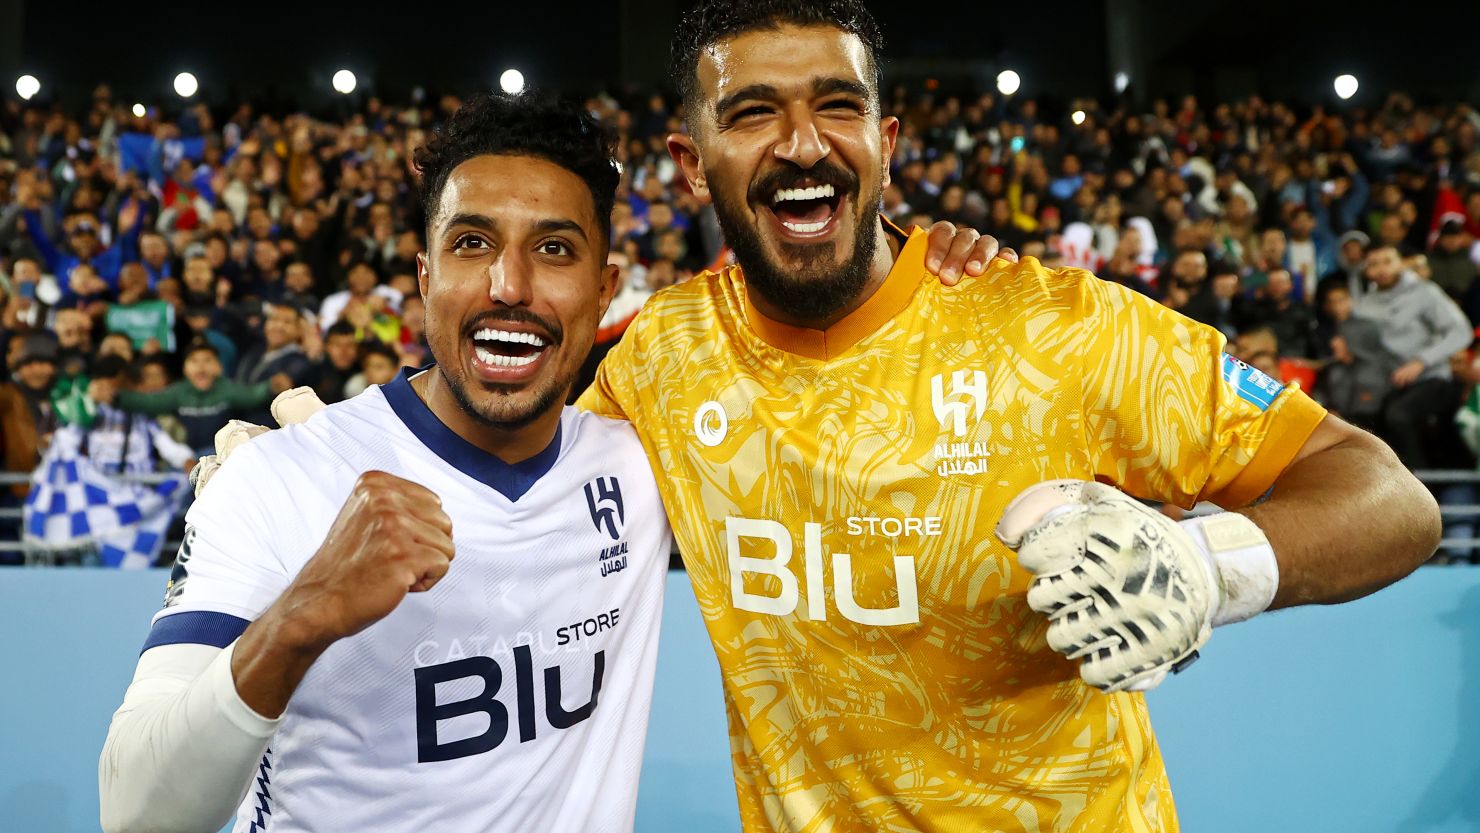 Salem Aldawsari and Abdullah Al-Mayouf of Al Hilal celebrate after the team's victory over Flamengo in the semifinals of the Club World Cup at Stade Ibn-Batouta.